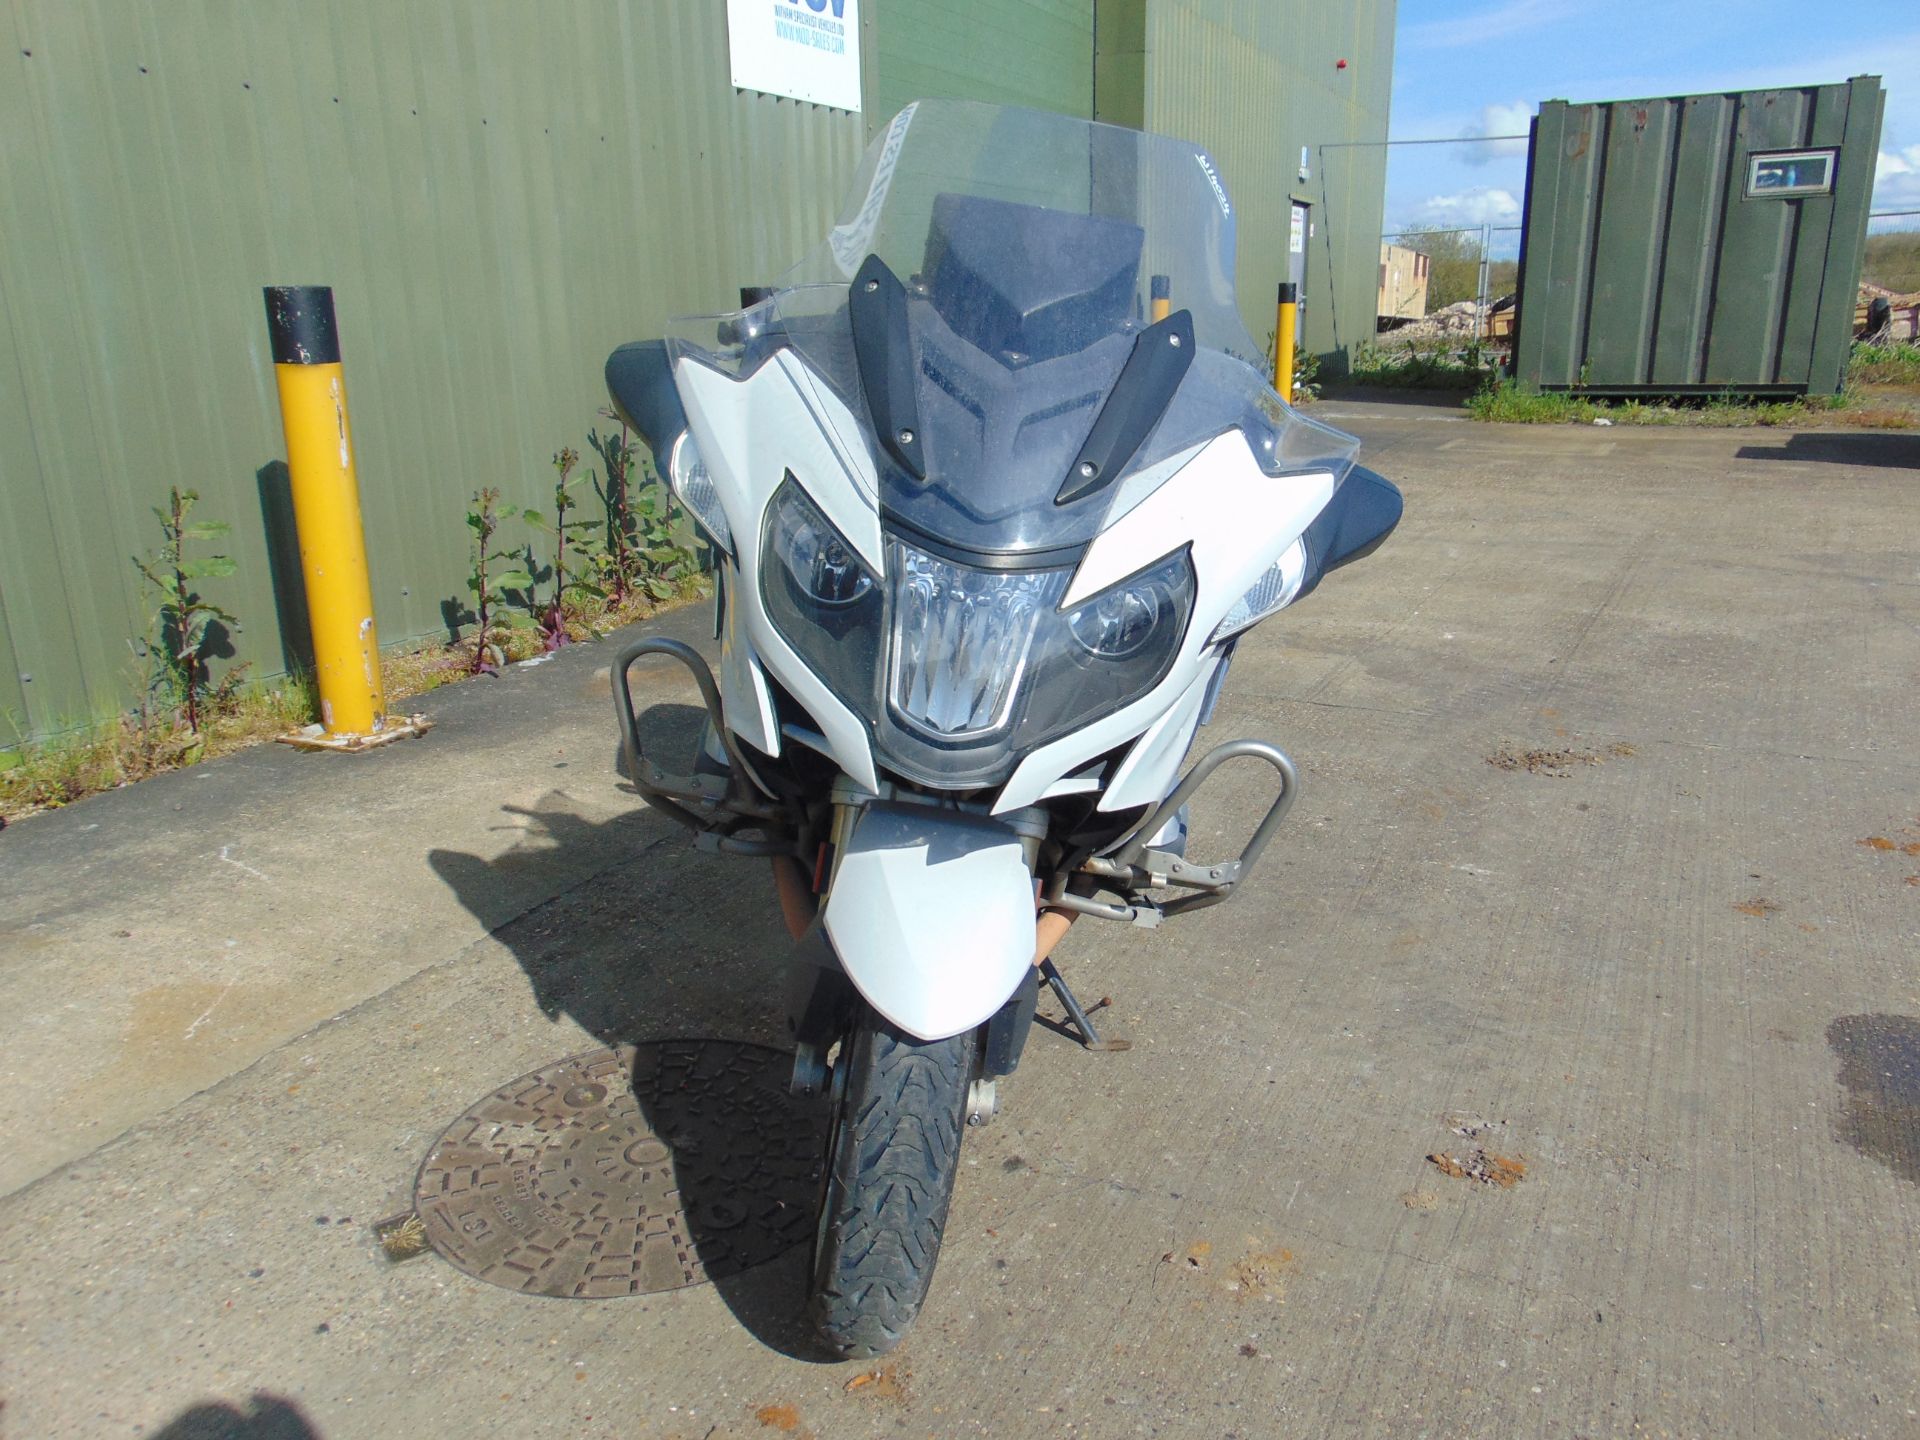 2018 BMW R1200RT Motorbike 50,000 miles from UK Police - Image 3 of 38